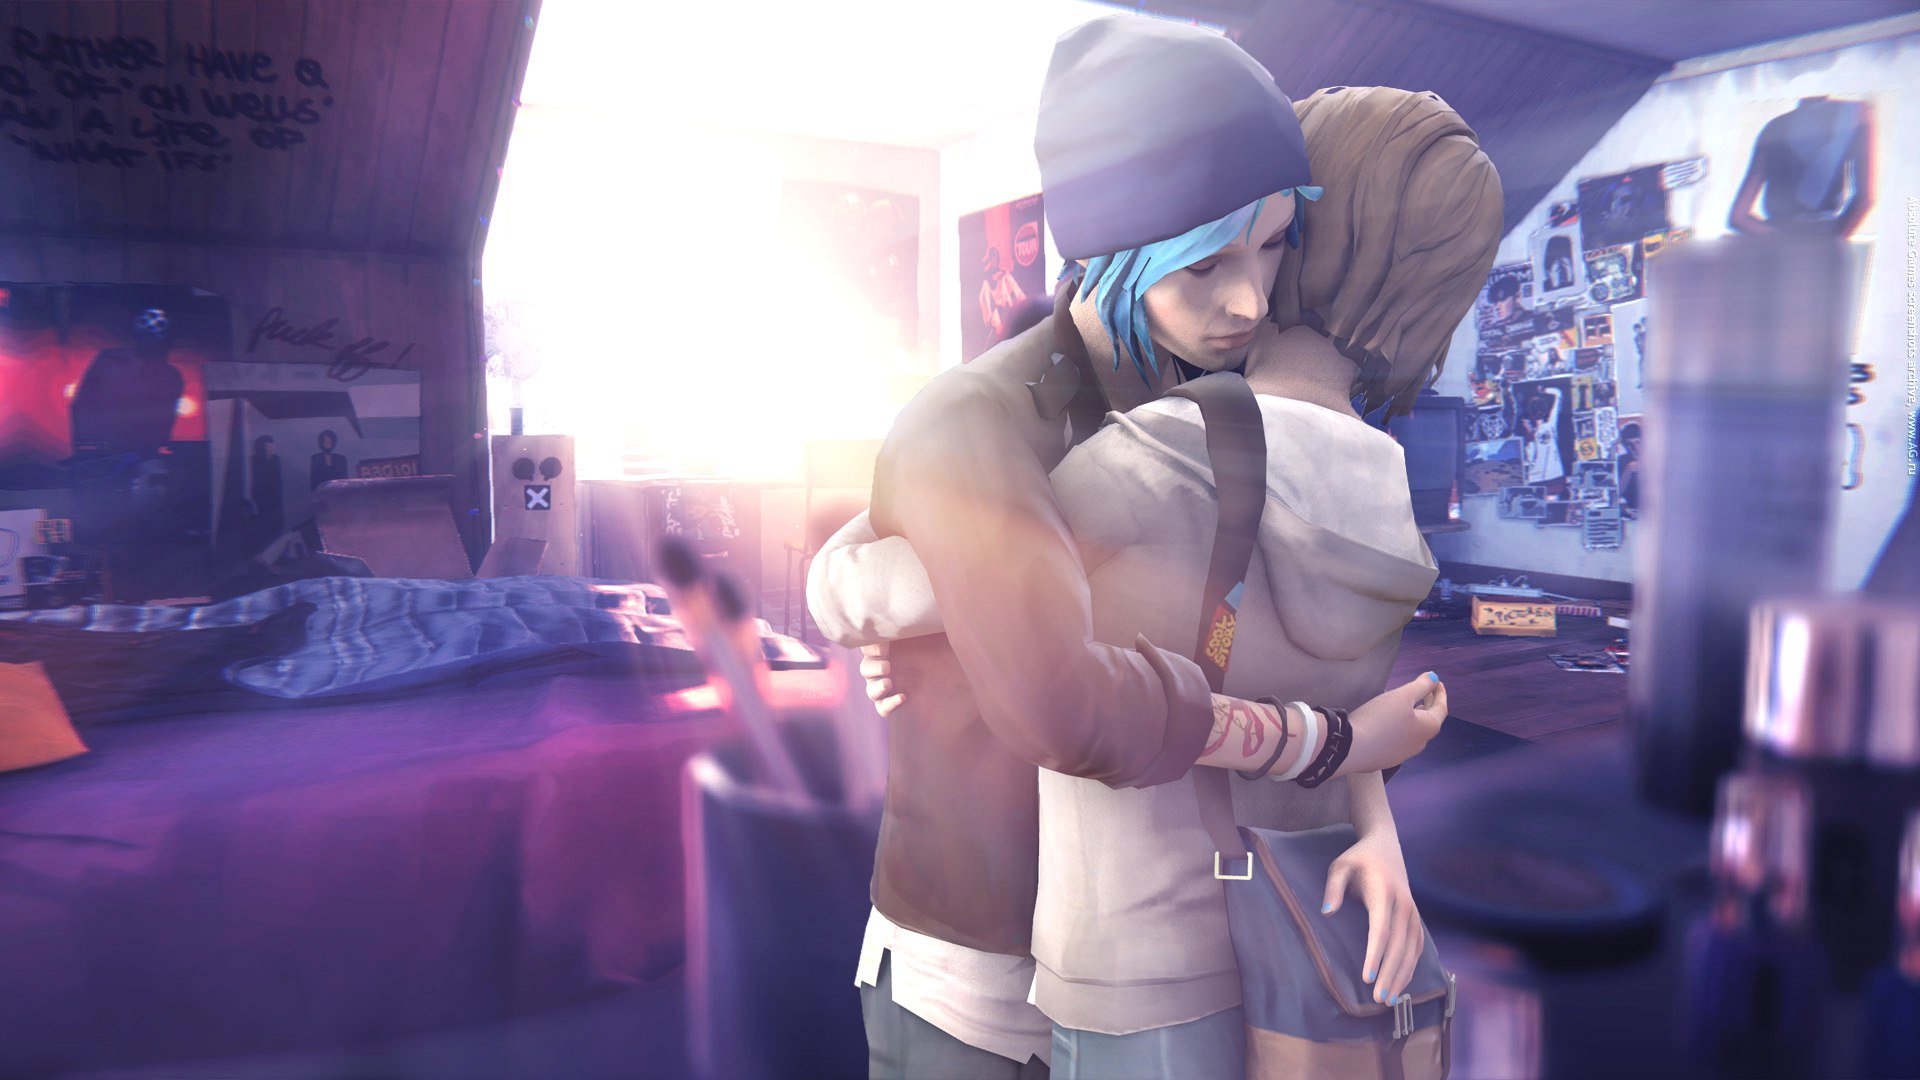 Life Is Strange wallpaper ID:148188 for hd 1920x1080 computer.